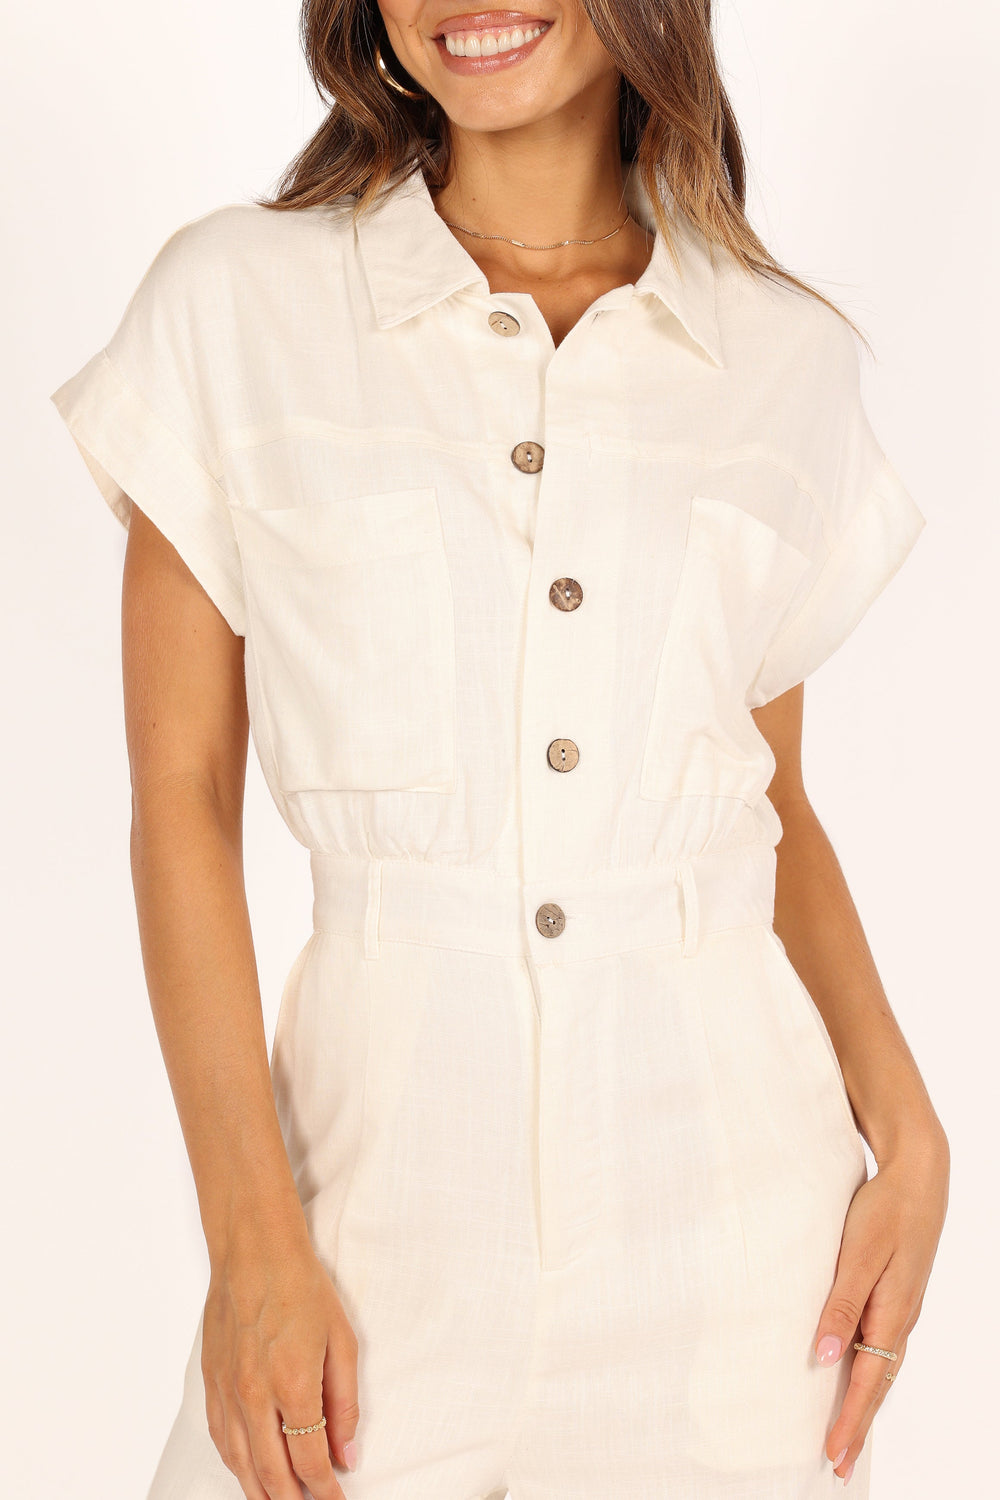 Terry Collar Button Up Short Sleeve Romper - Cider